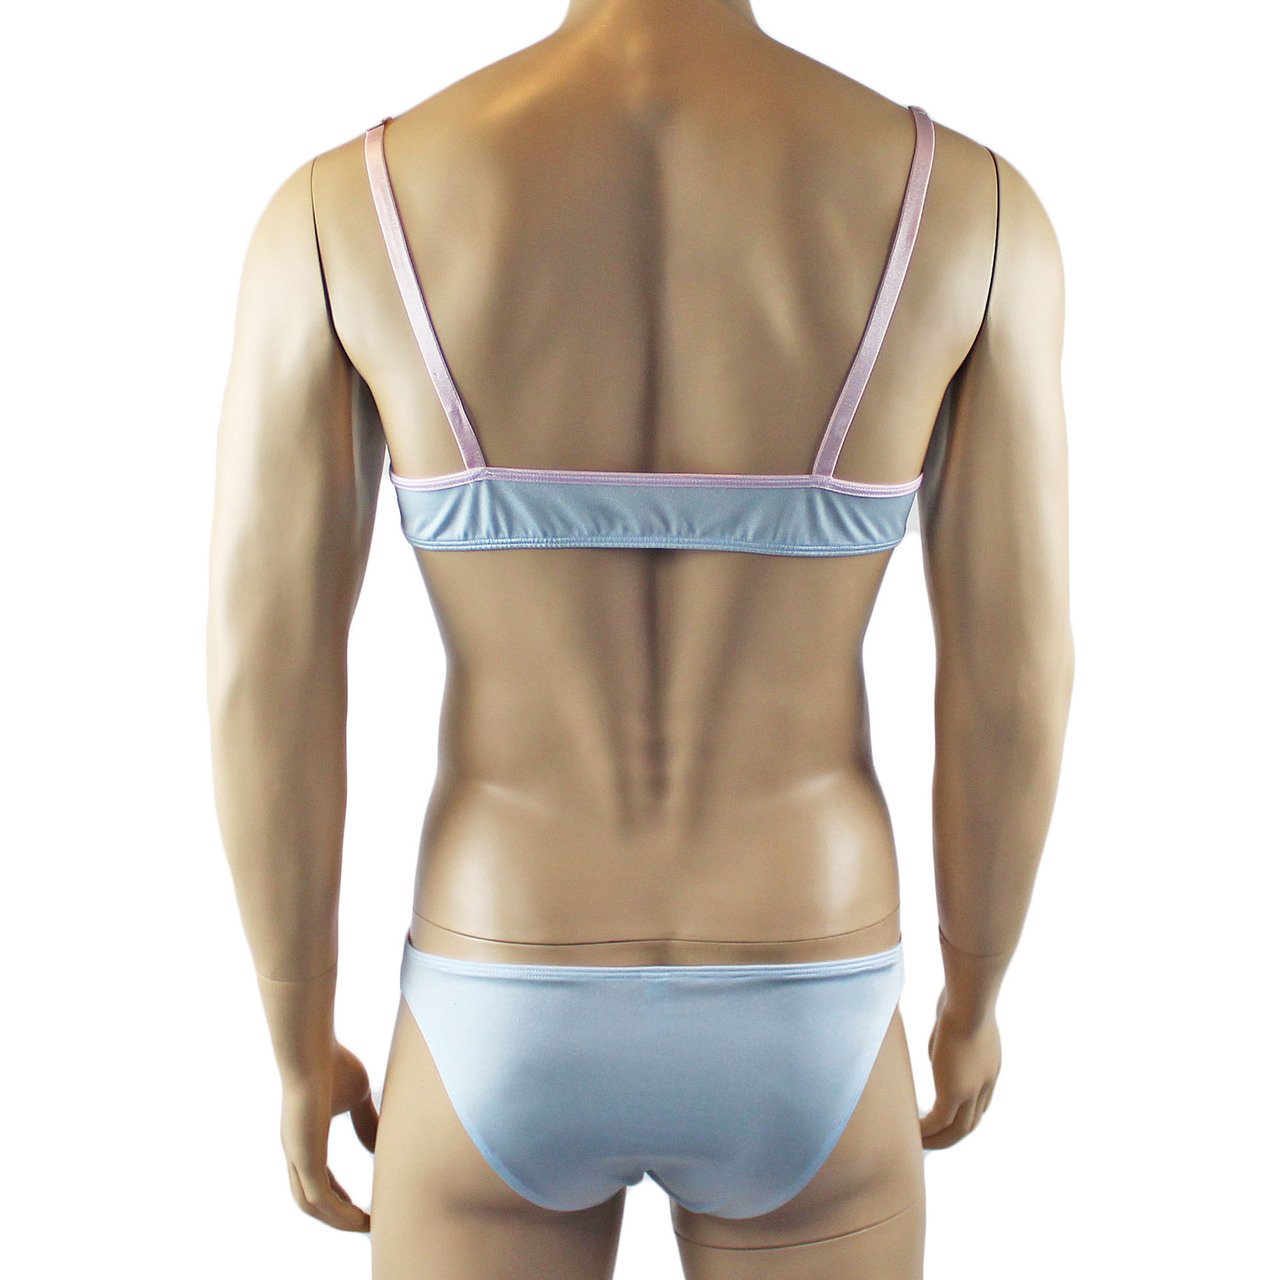 Mens Isabel Bra Top and Bikini Brief Male Lingerie (light blue and pink plus other colours)